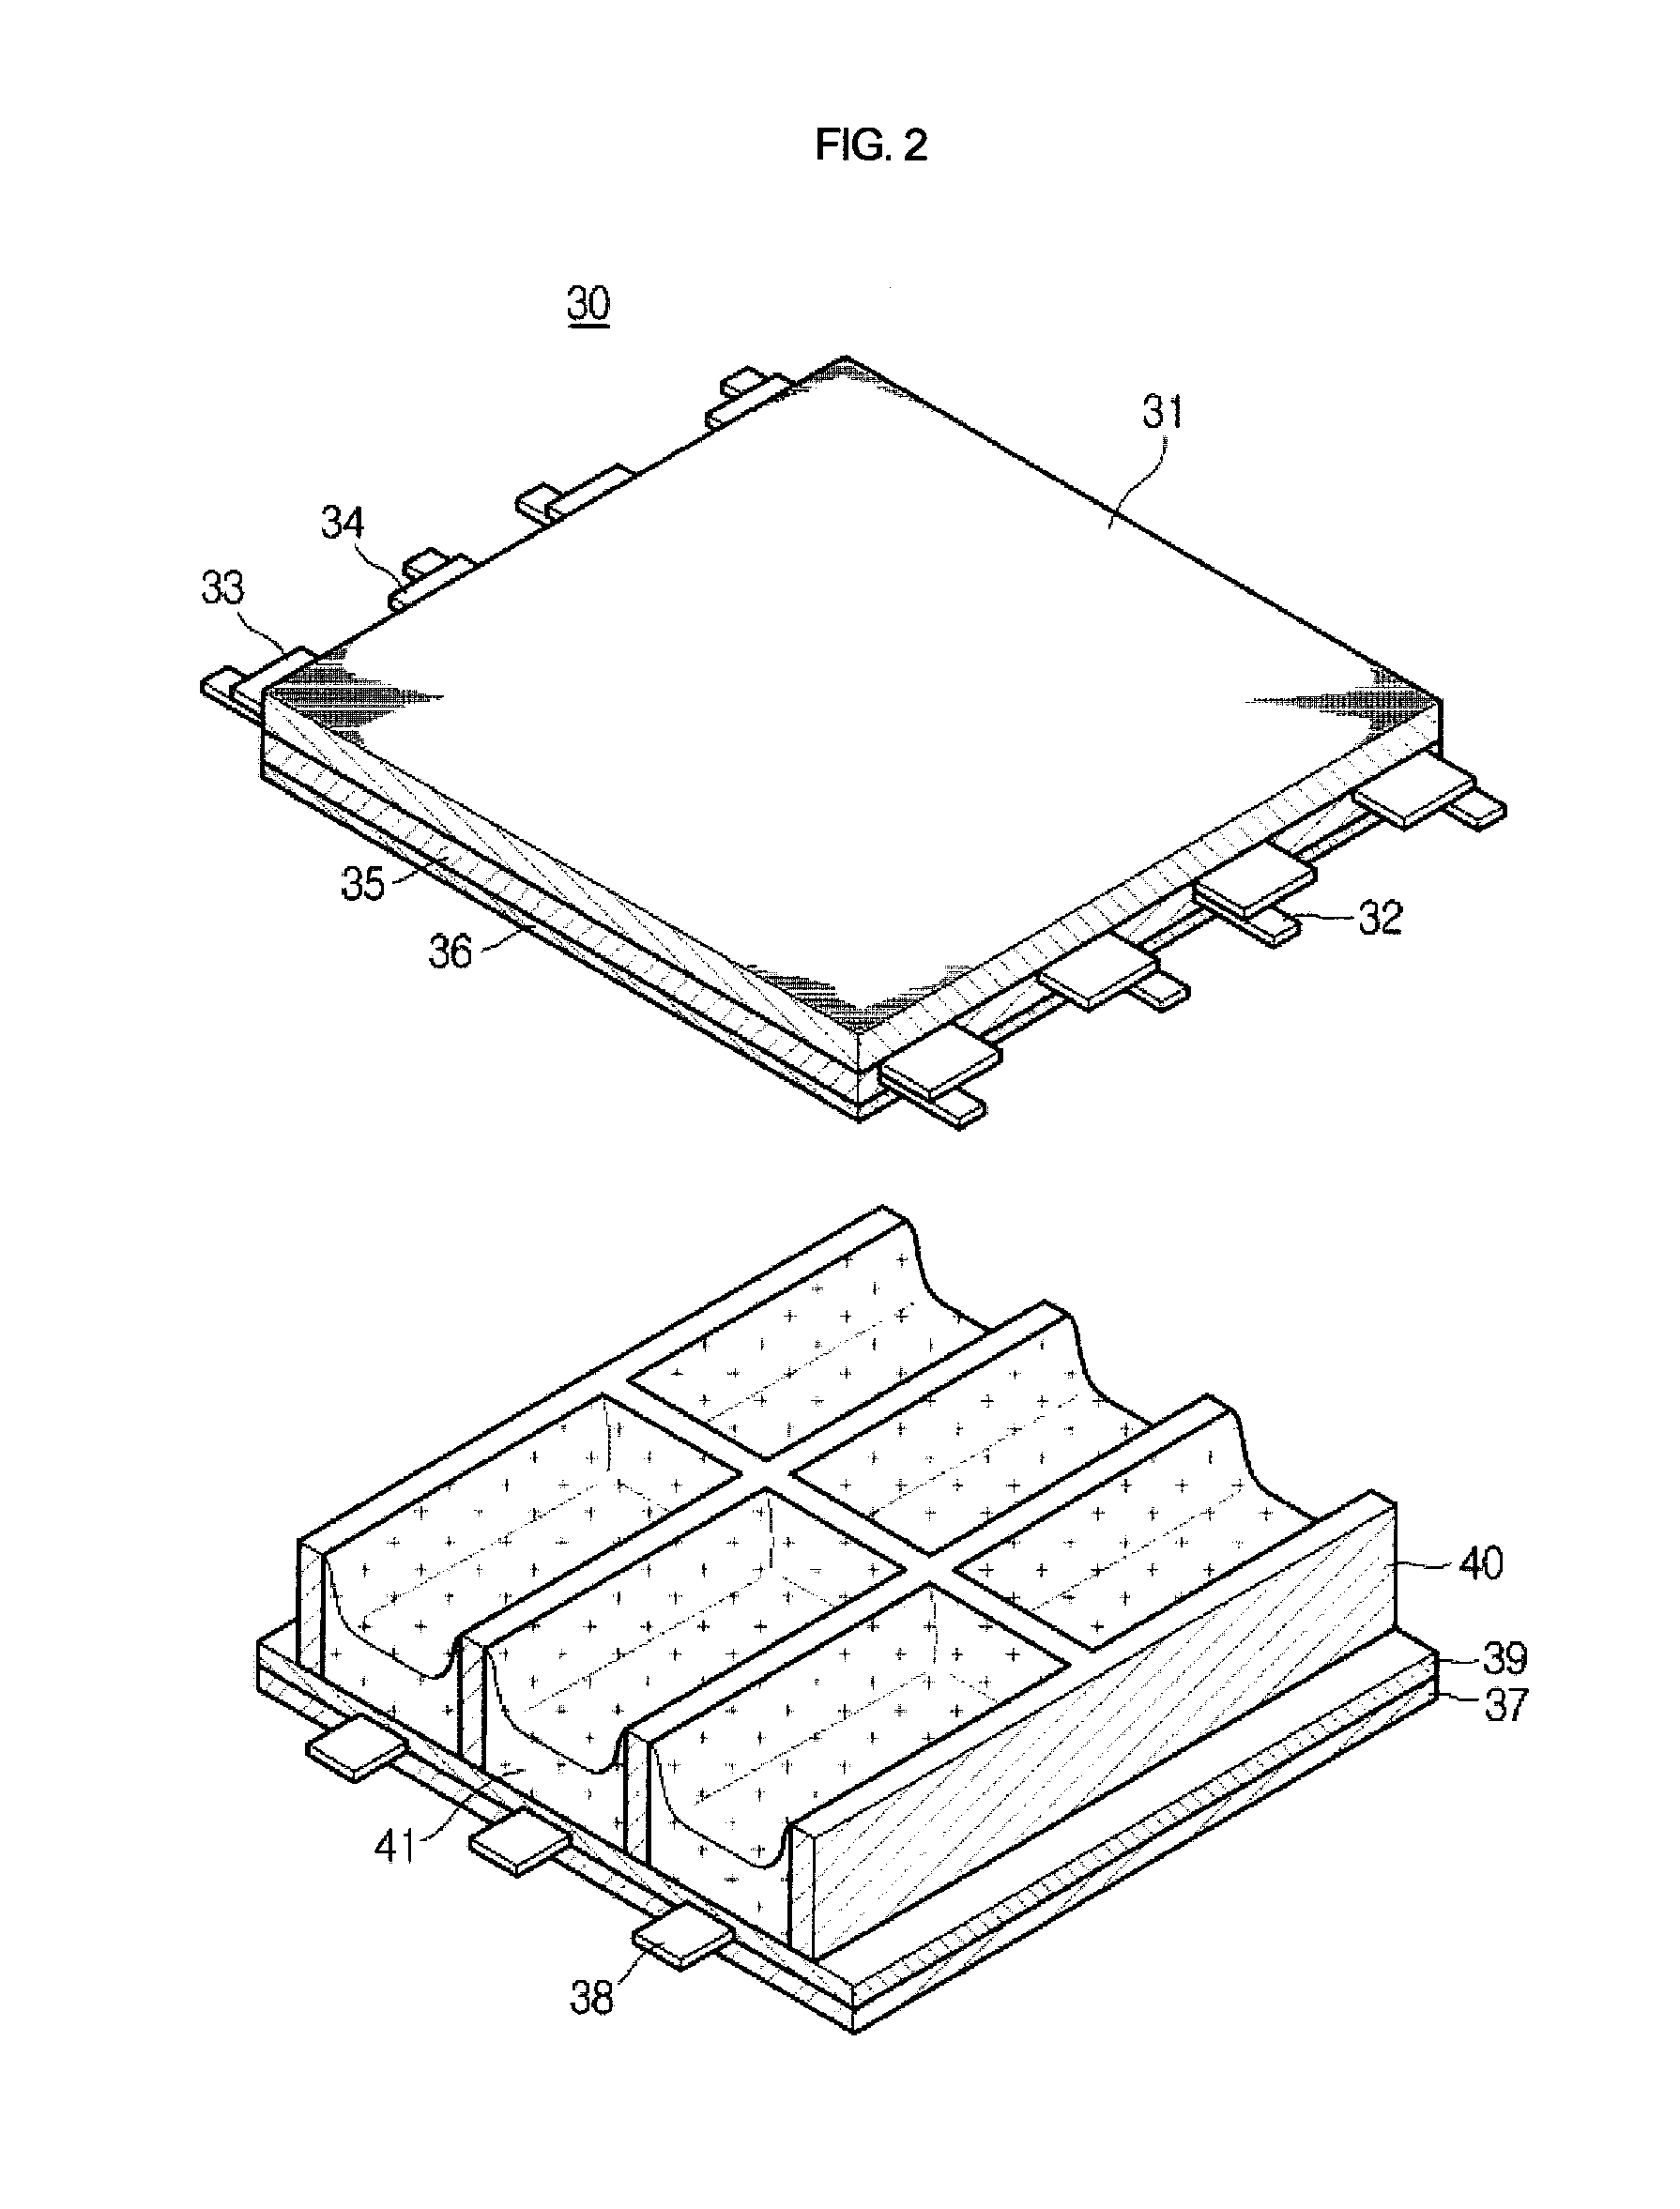 Ac-plasma display devices using metal nanoparticles or nanostructures and method for manufacturing the same